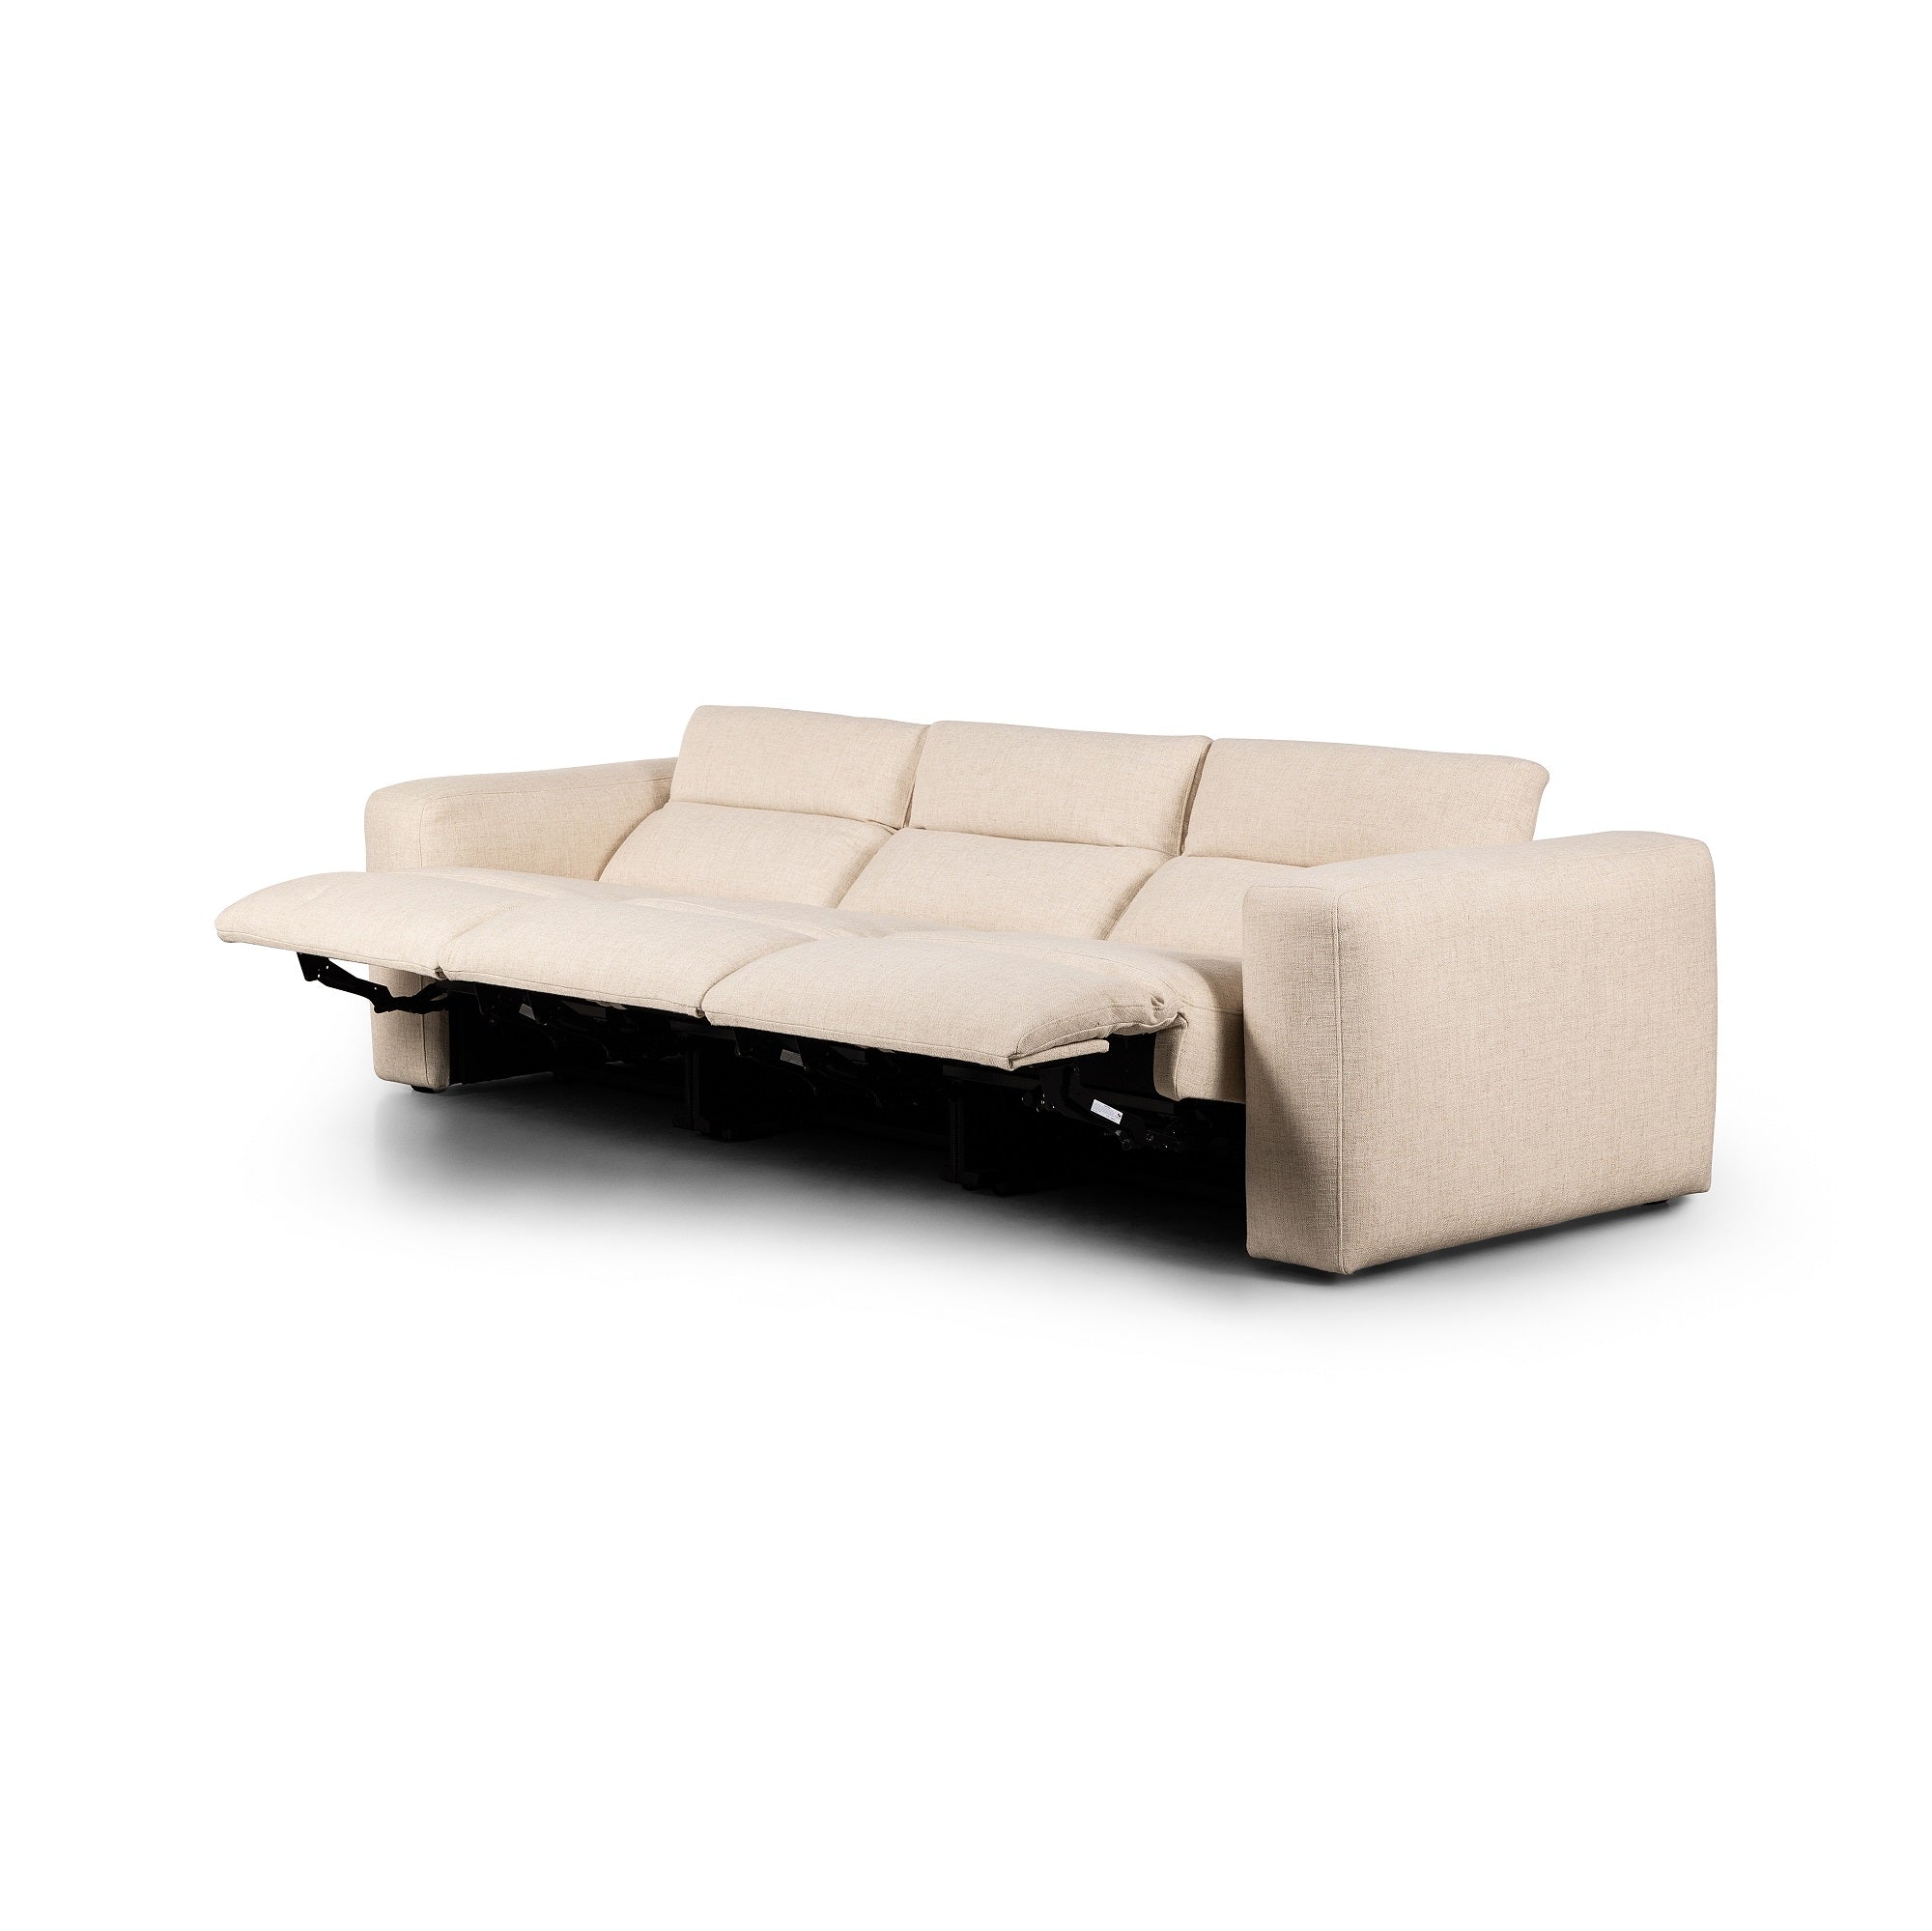 Baylor Power Recliner 3-piece Sectional